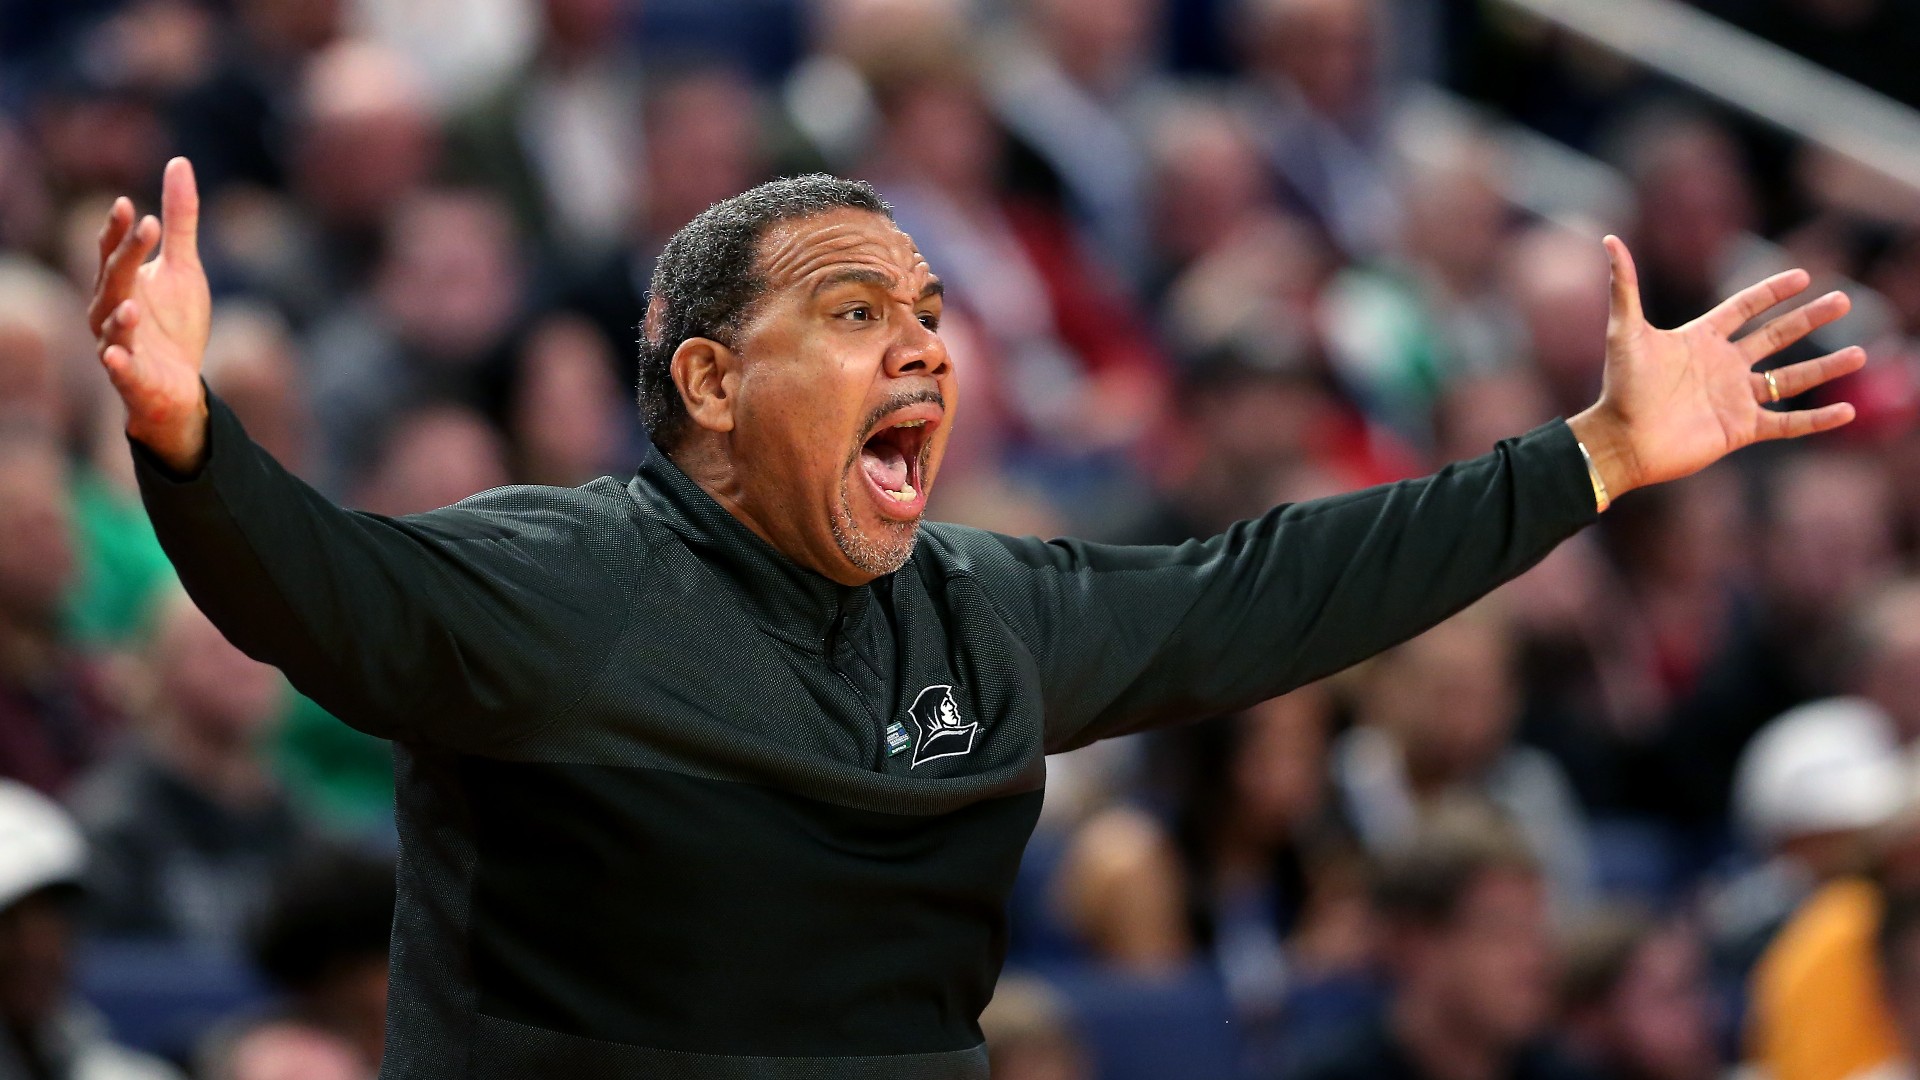 Richmond vs. Providence Odds, Picks & Predictions: How to Bet This NCAA Tournament Second-Round Clash article feature image